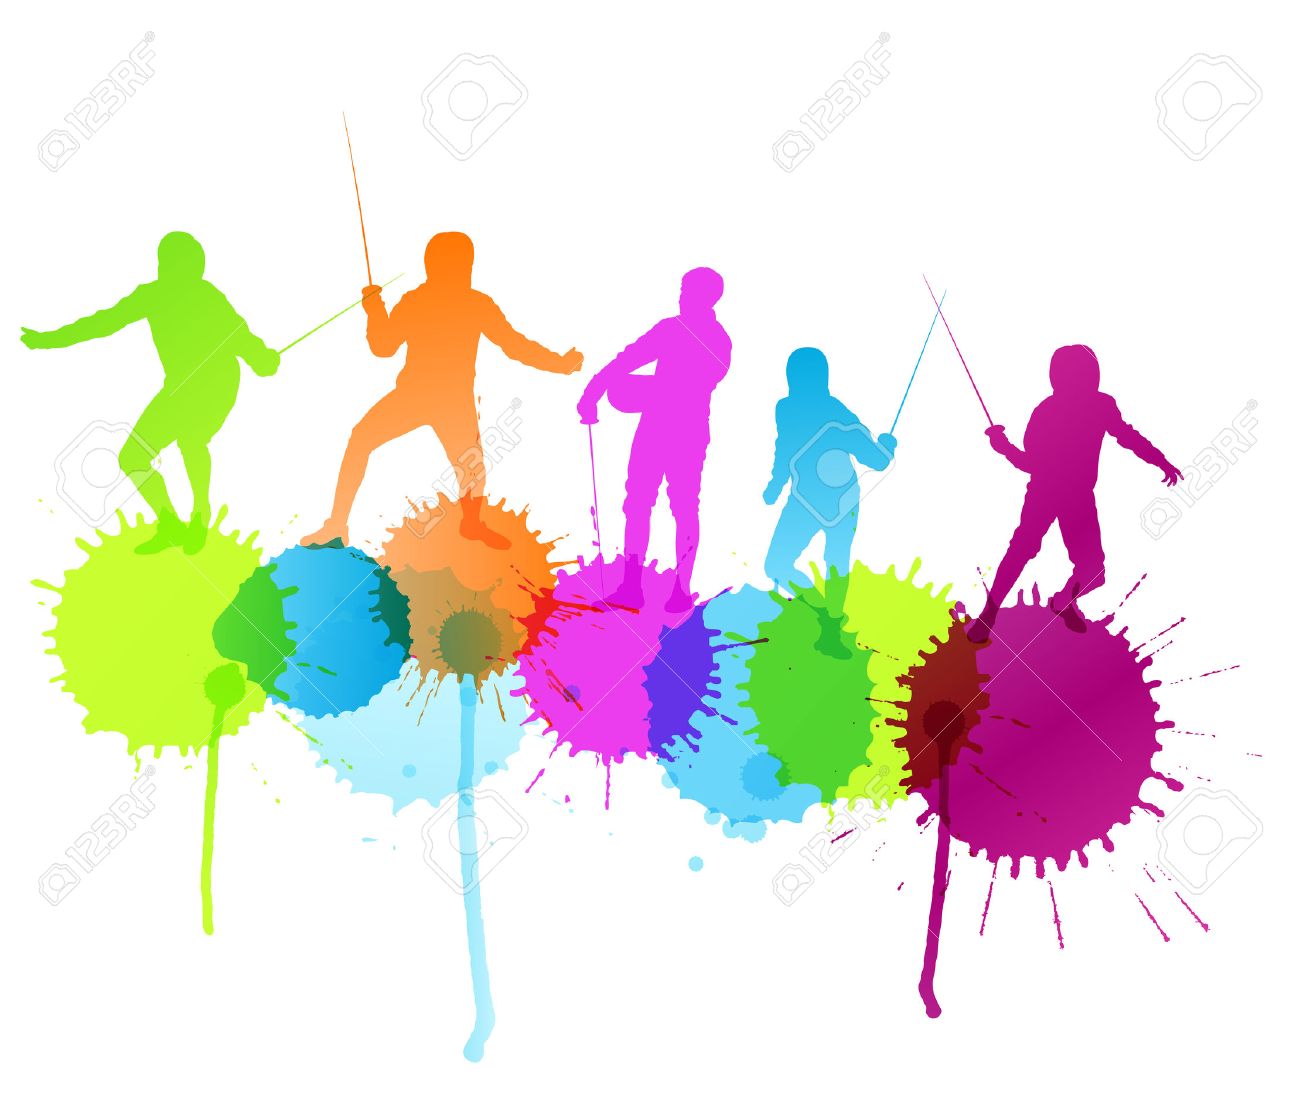 Fencing Sport Silhouette Vector Background Concept With Color